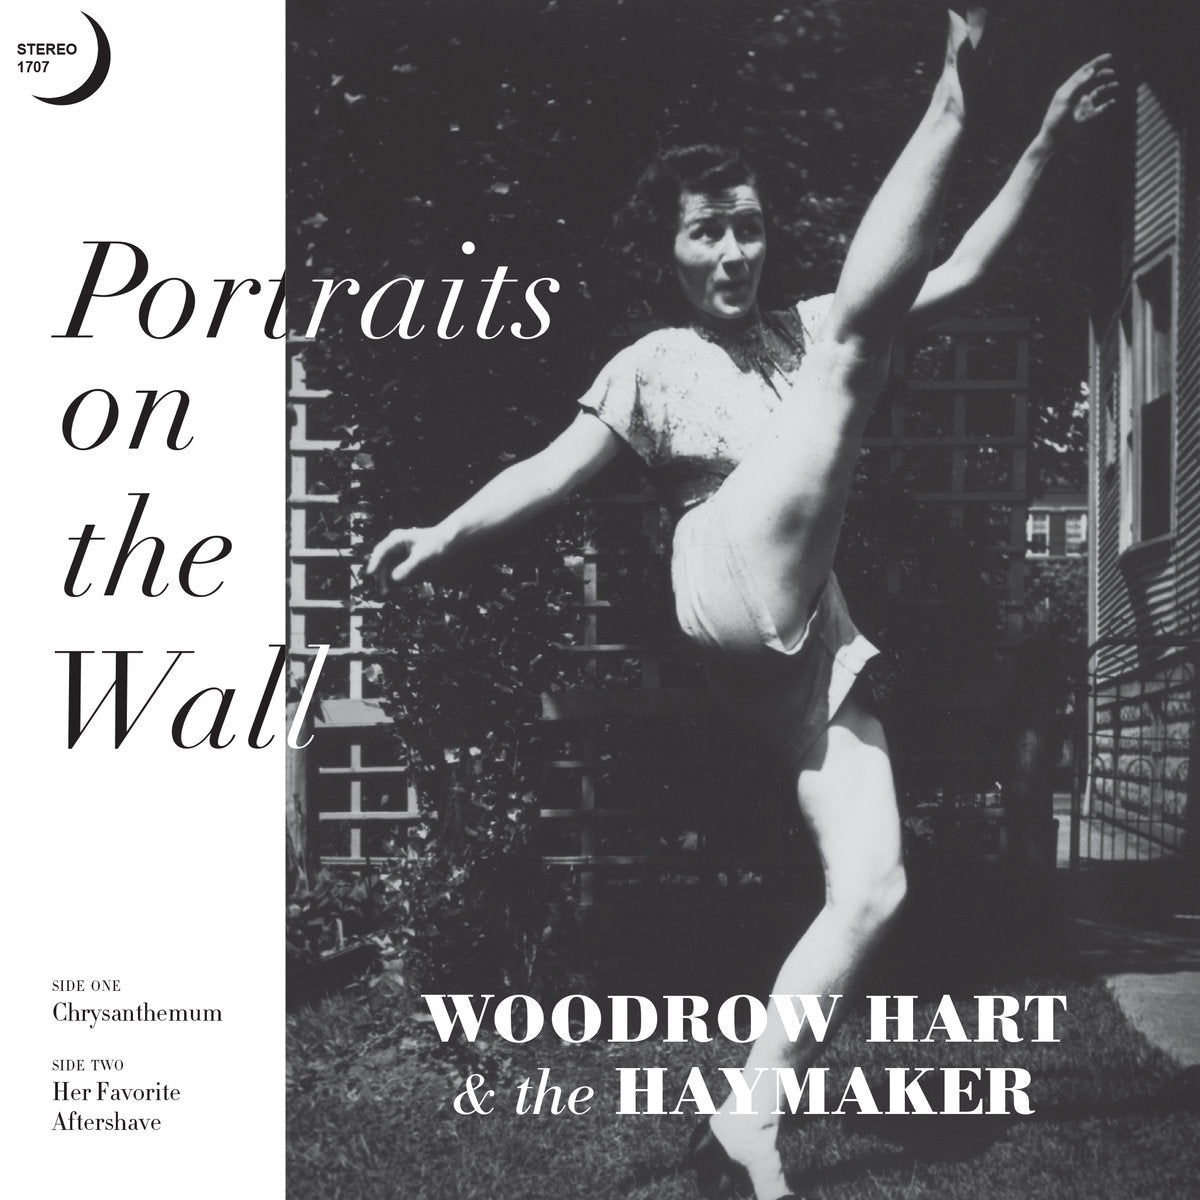 Woodrow Hart & the Haymaker - Portaits on The Wall - New 7" Vinyl 2018 The Mighty Ohio Records Pressing with 45 Adapter and Download - Chicago, IL Folk / Americana